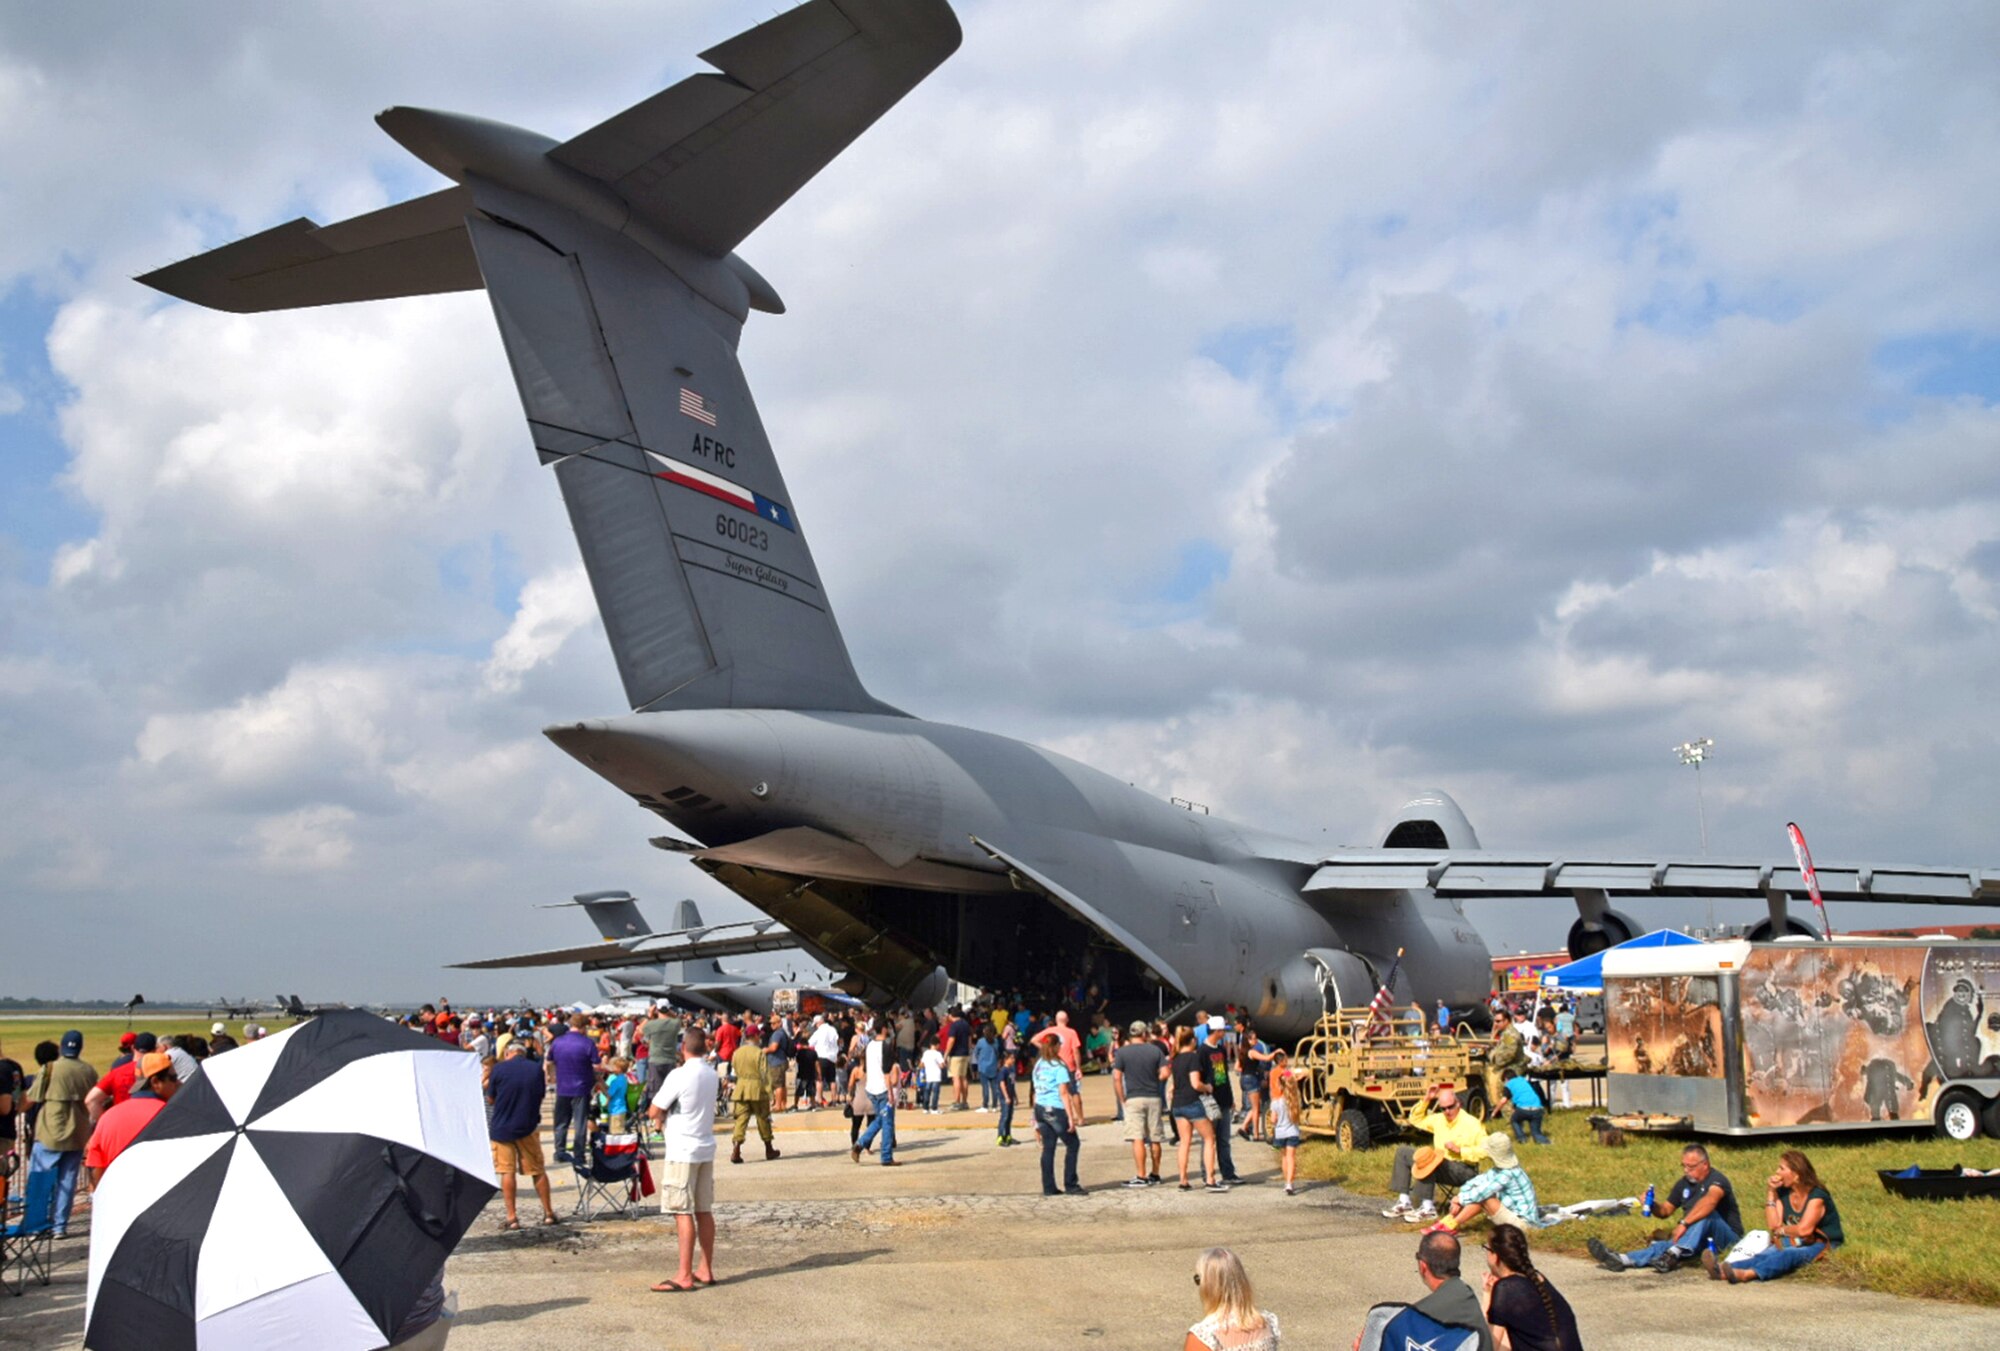 Over 150,000 visitors were expected to visit the Joint Base San Antonio-Lackland Air Show and Open House, Nov. 4, 2017.